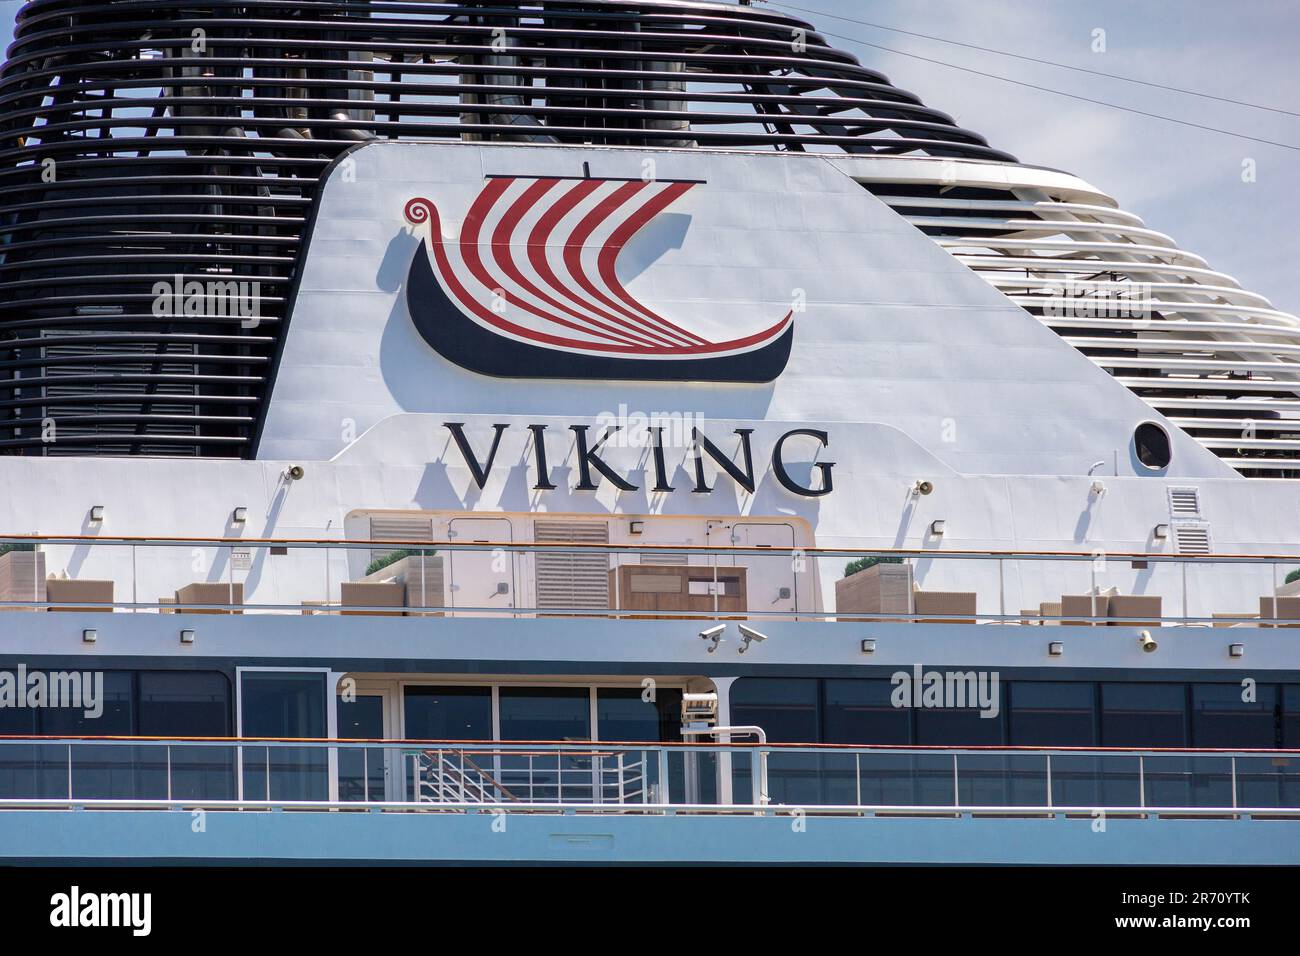 Viking Octantis Expedition Cruise Ship Moored In Port Colborne Ontario Canada Part Of The Welland Canal Linking Lake Erie To Lake Ontario The Great La Stock Photo